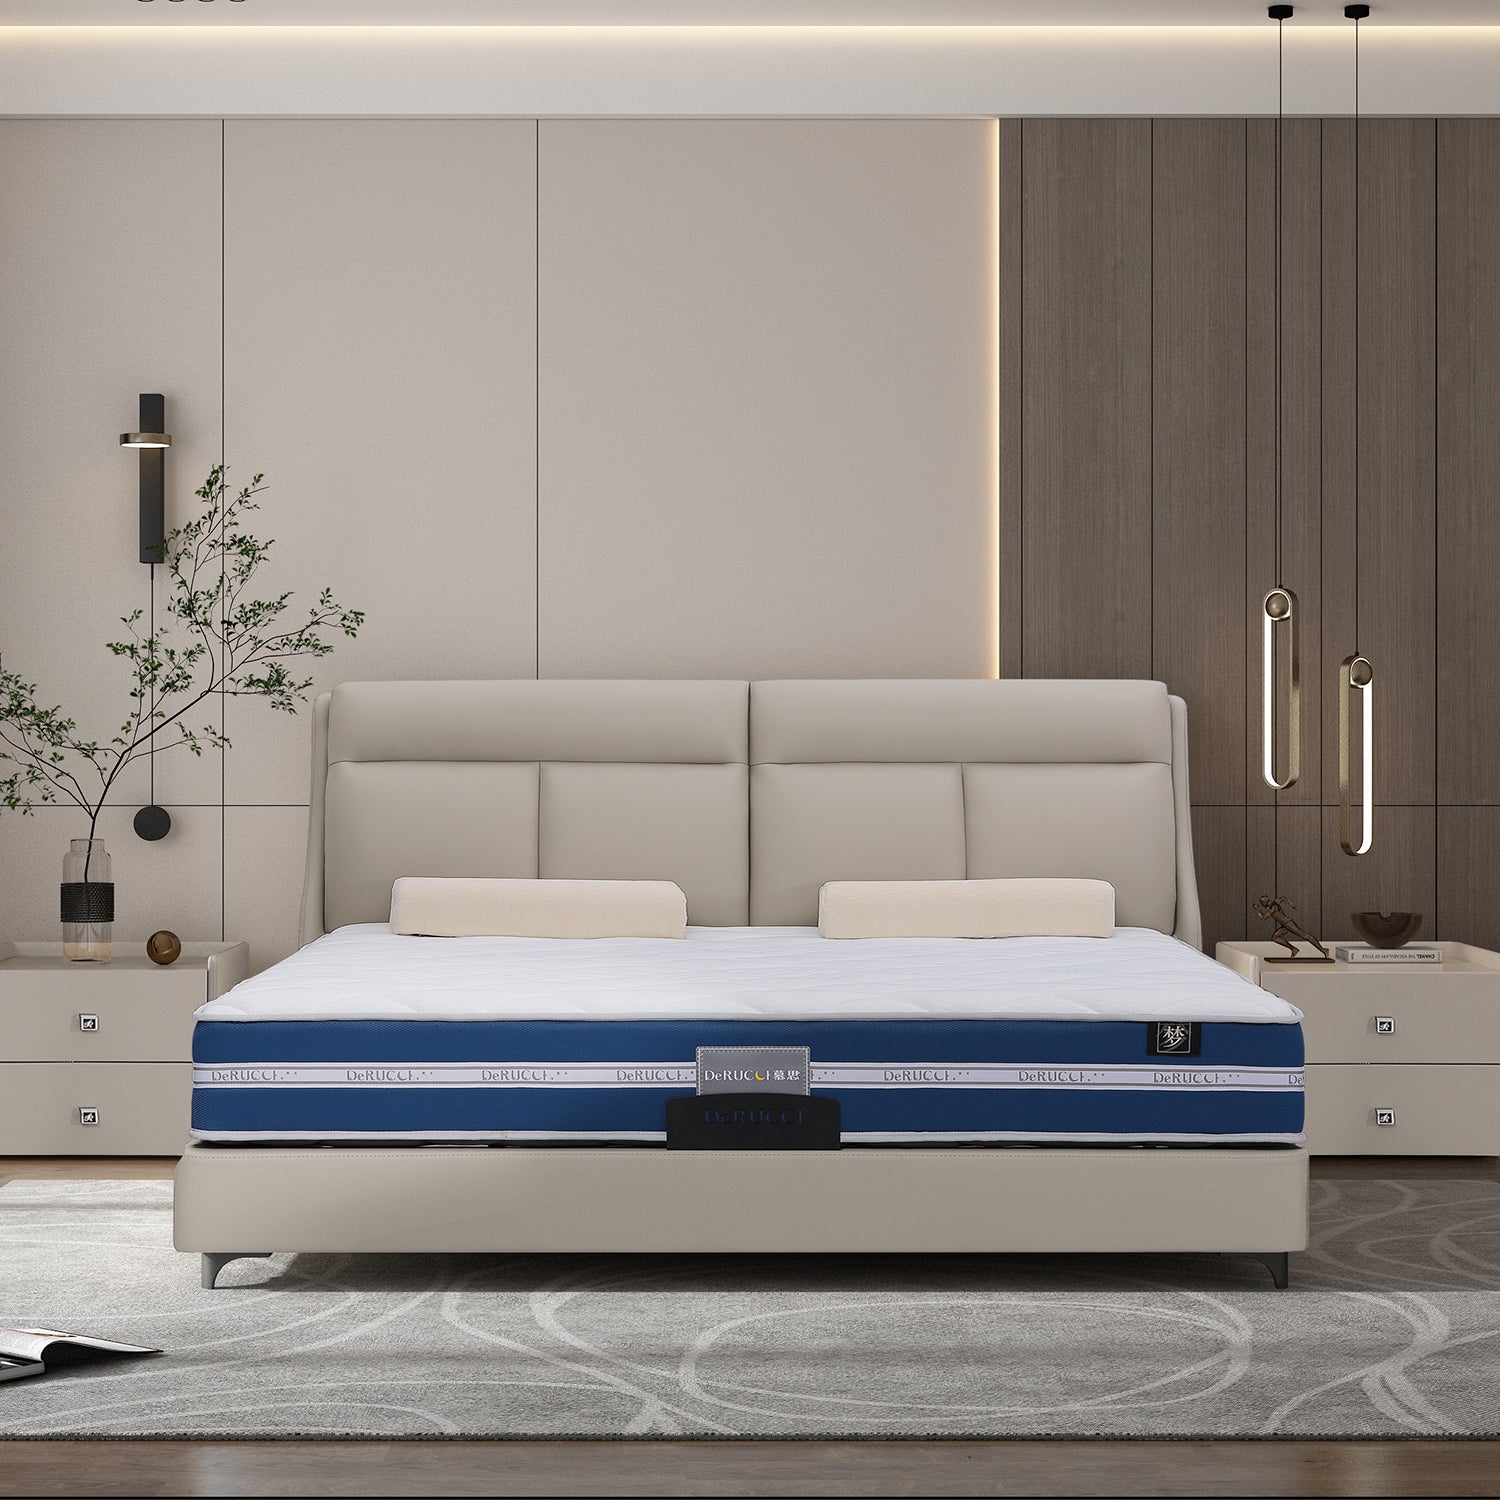 Bed Frame BOC1 - 002 upholstered in top layer leather and PVC, featuring a double-layered mattress with a blue 'Dreamaker Excellence' cover in a modern bedroom setup with wooden paneling and decorative elements.